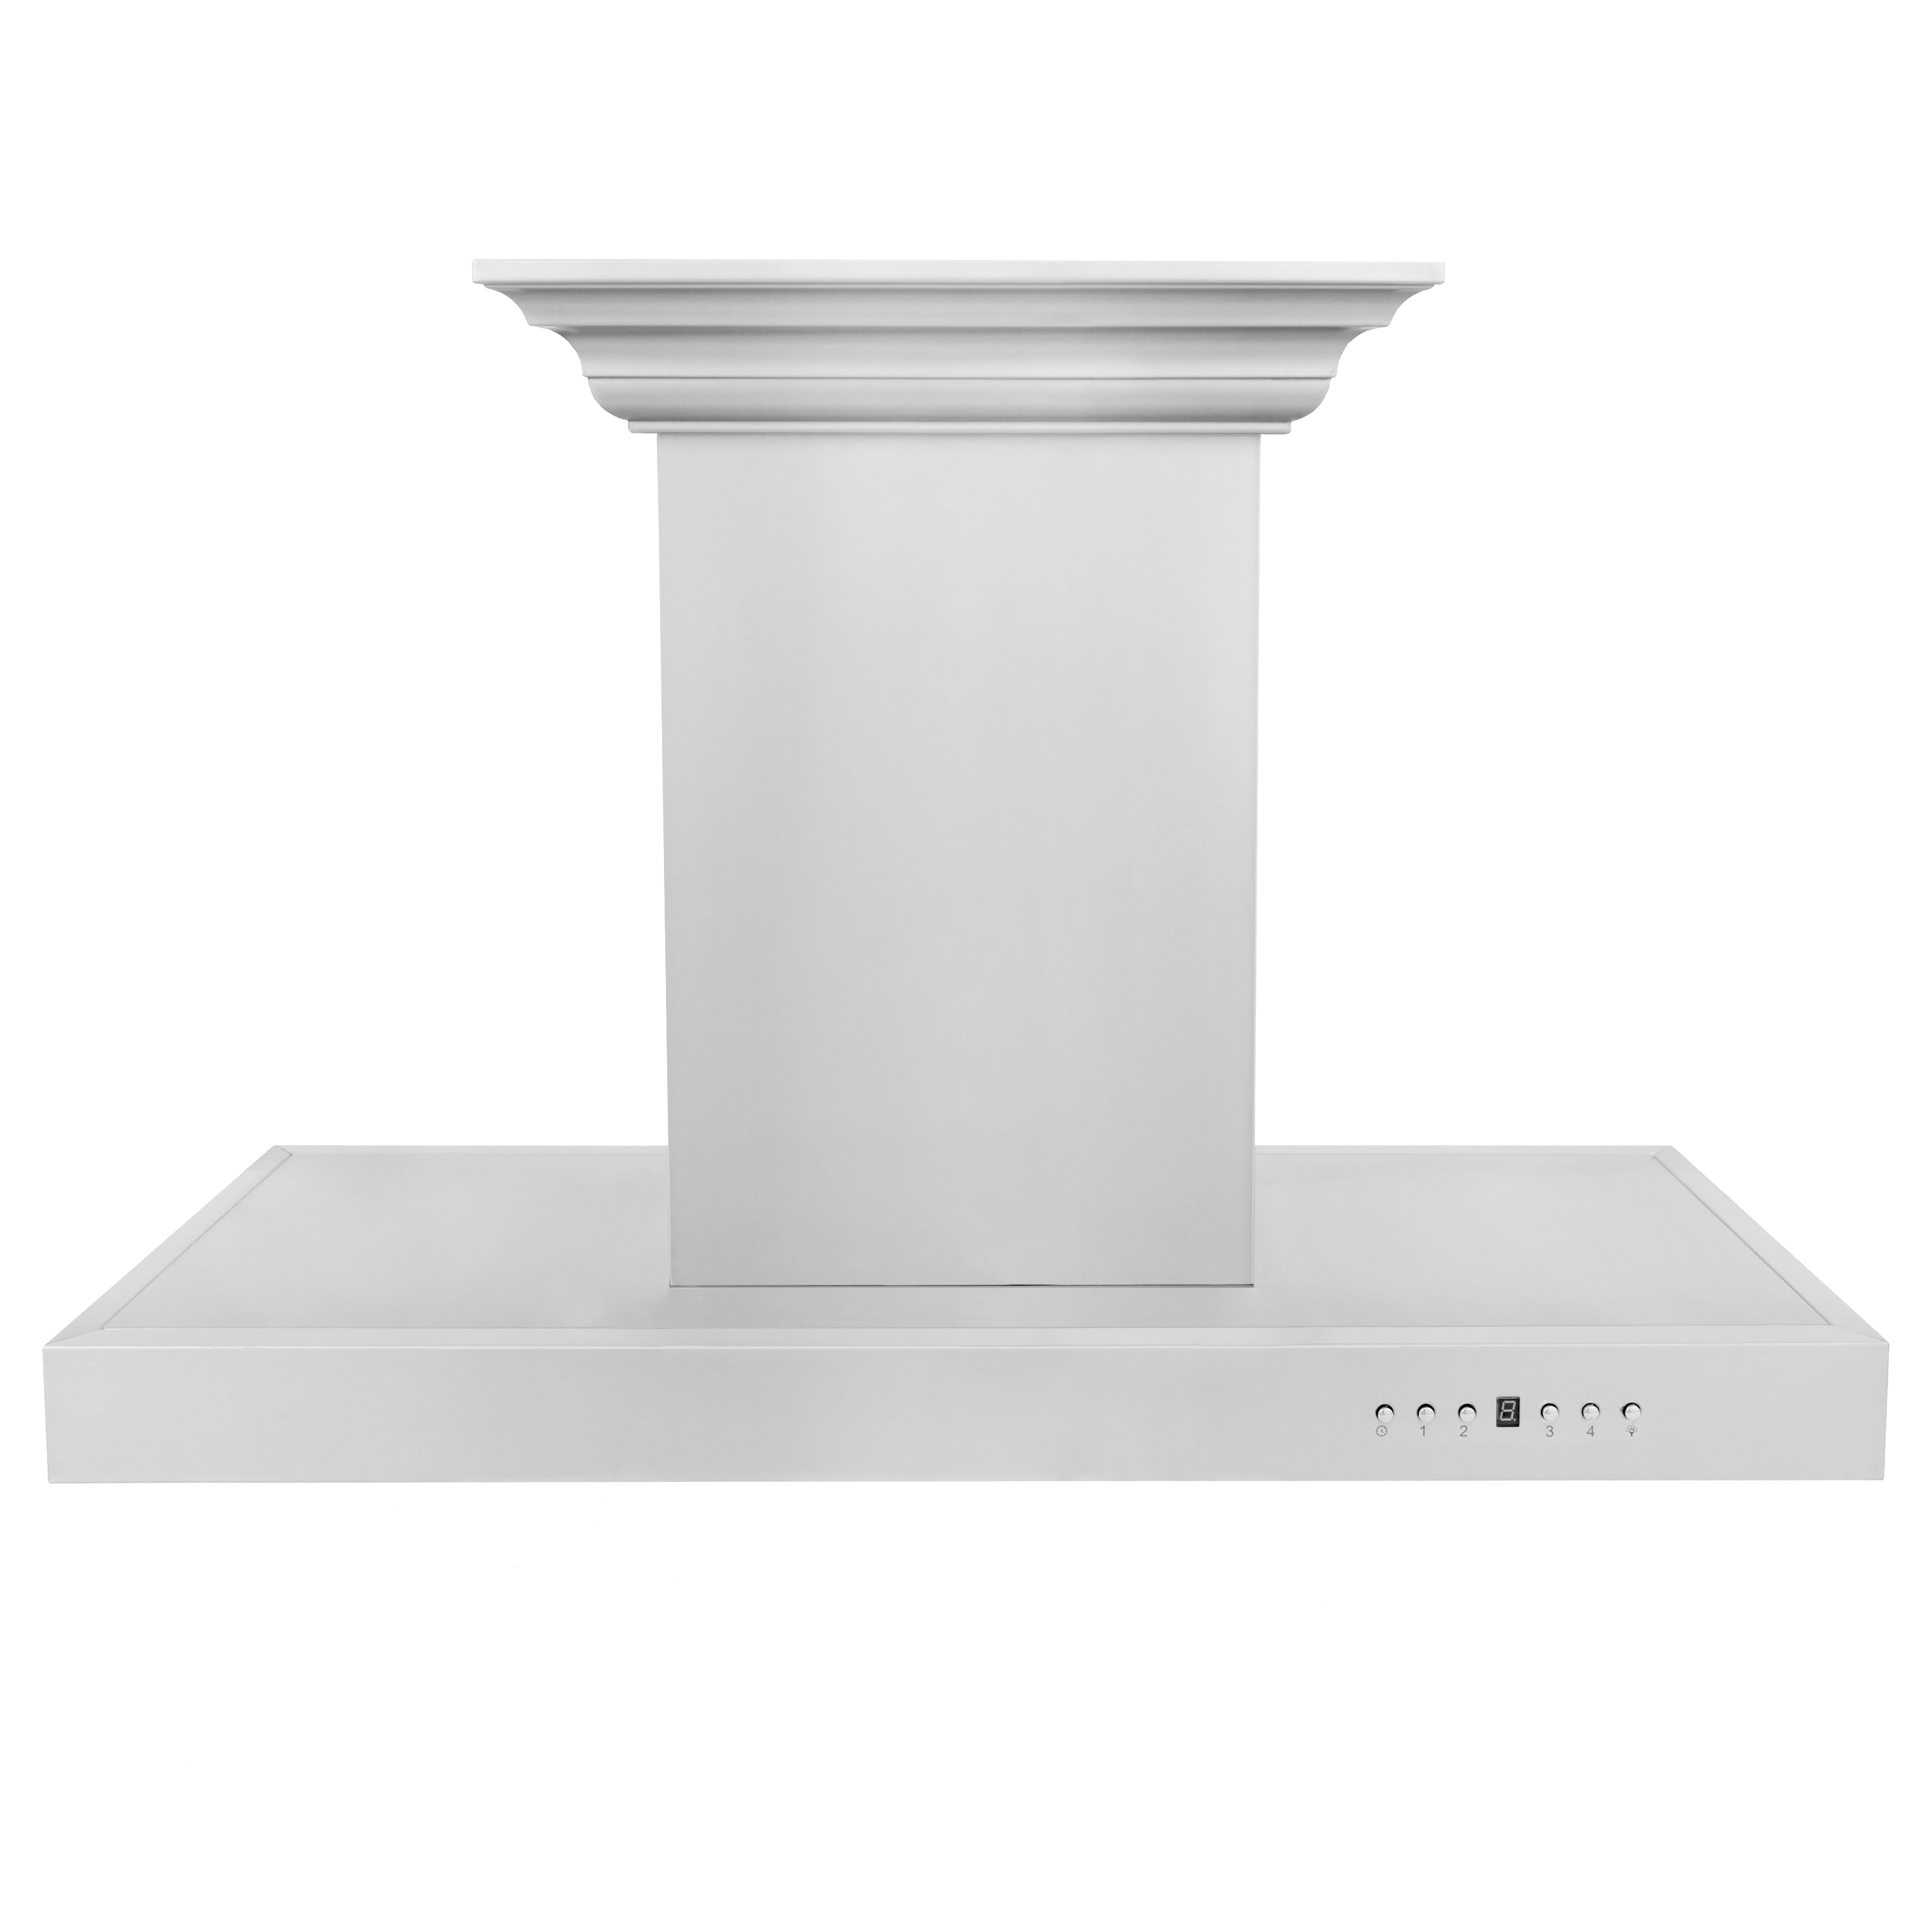 36" ZLINE CrownSound® Ducted Vent Island Mount Range Hood in Stainless Steel with Built-in Bluetooth Speakers (KE2iCRN-BT-36)